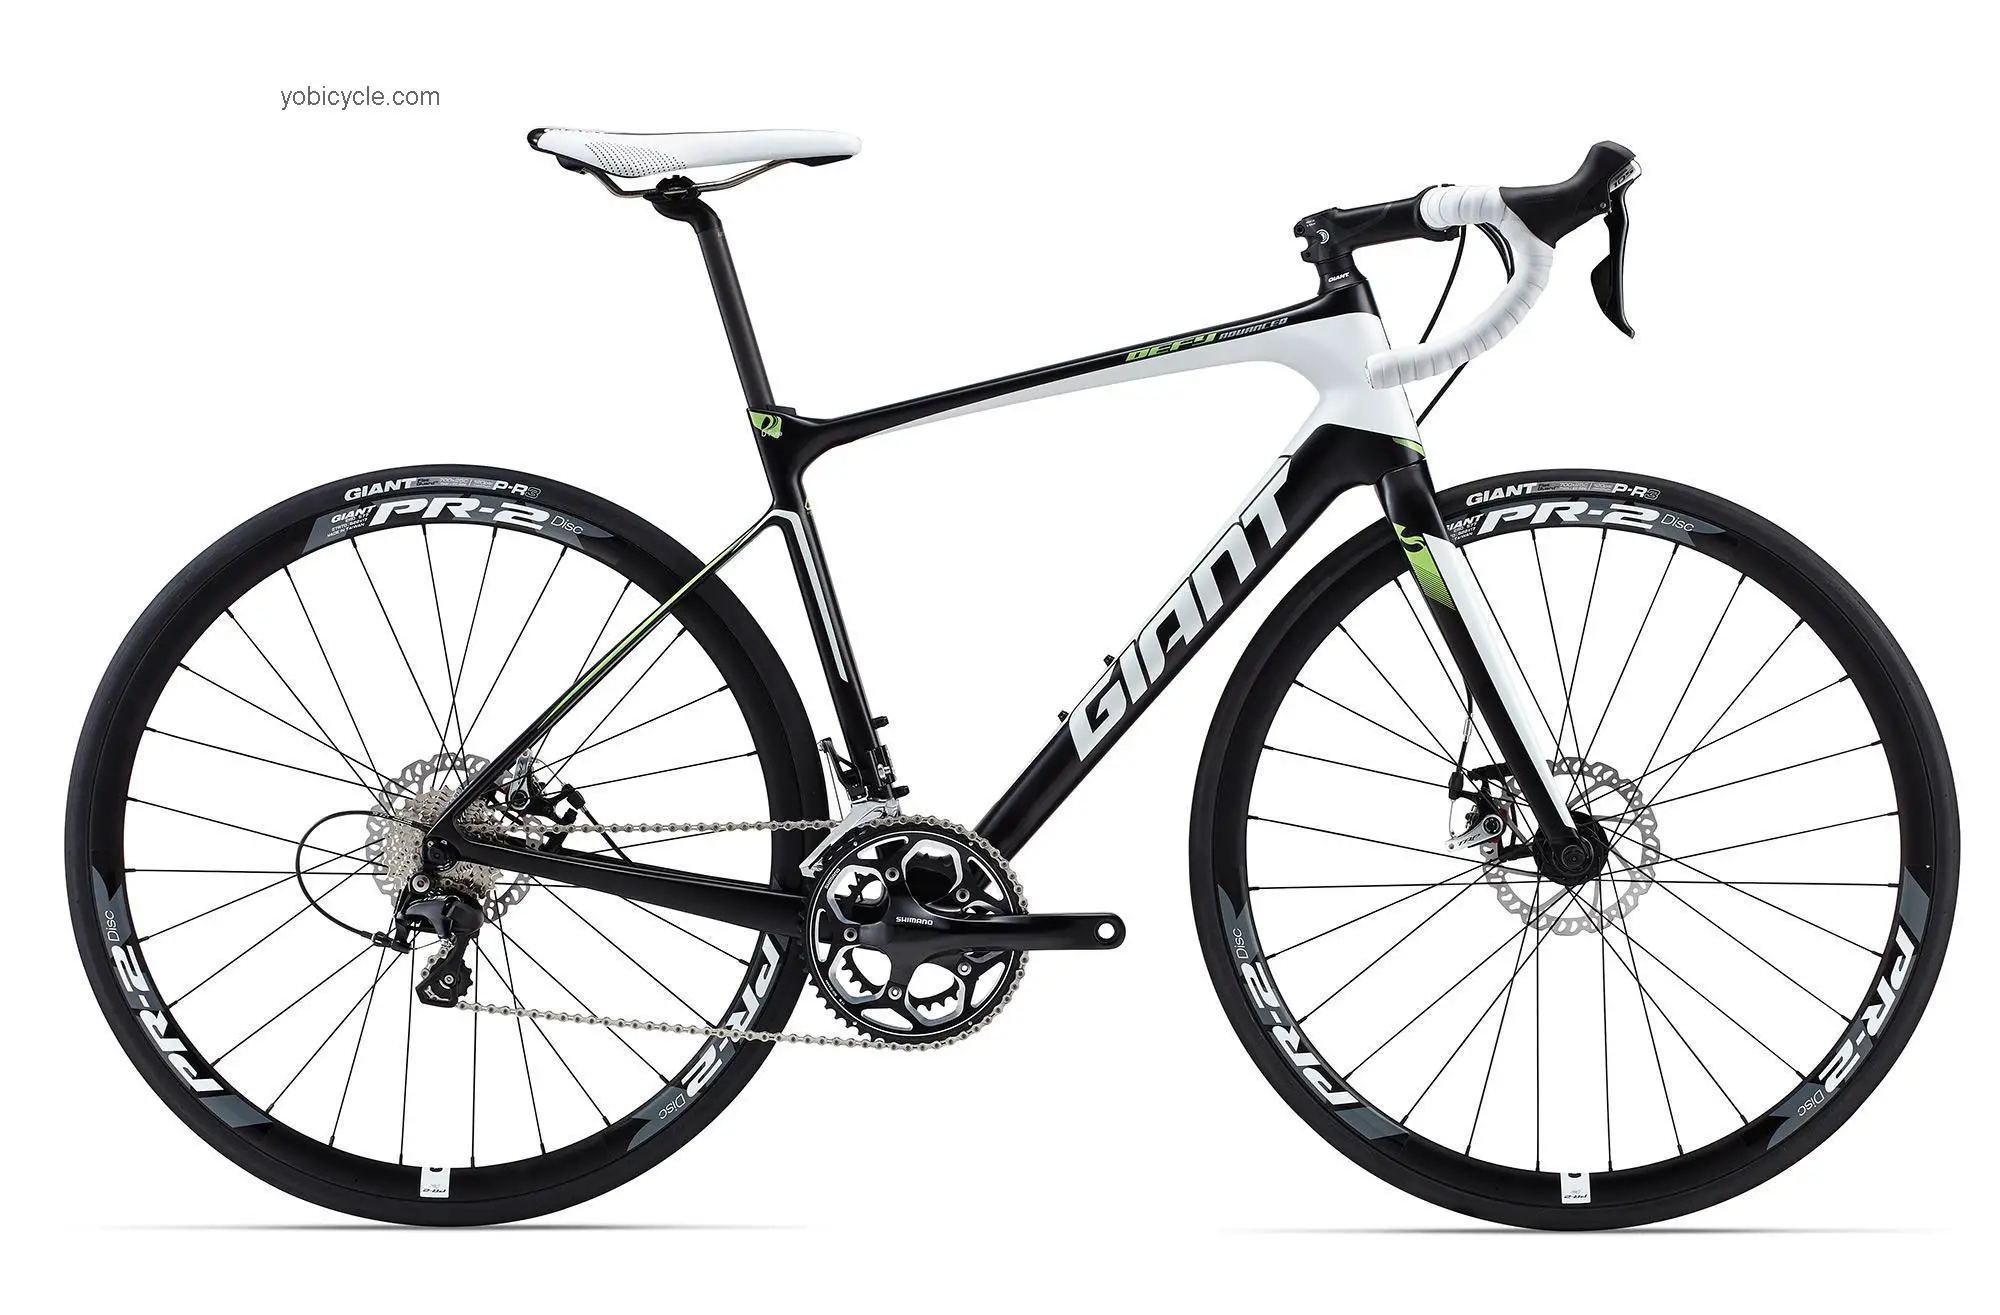 Giant Defy Advanced 2 2015 comparison online with competitors